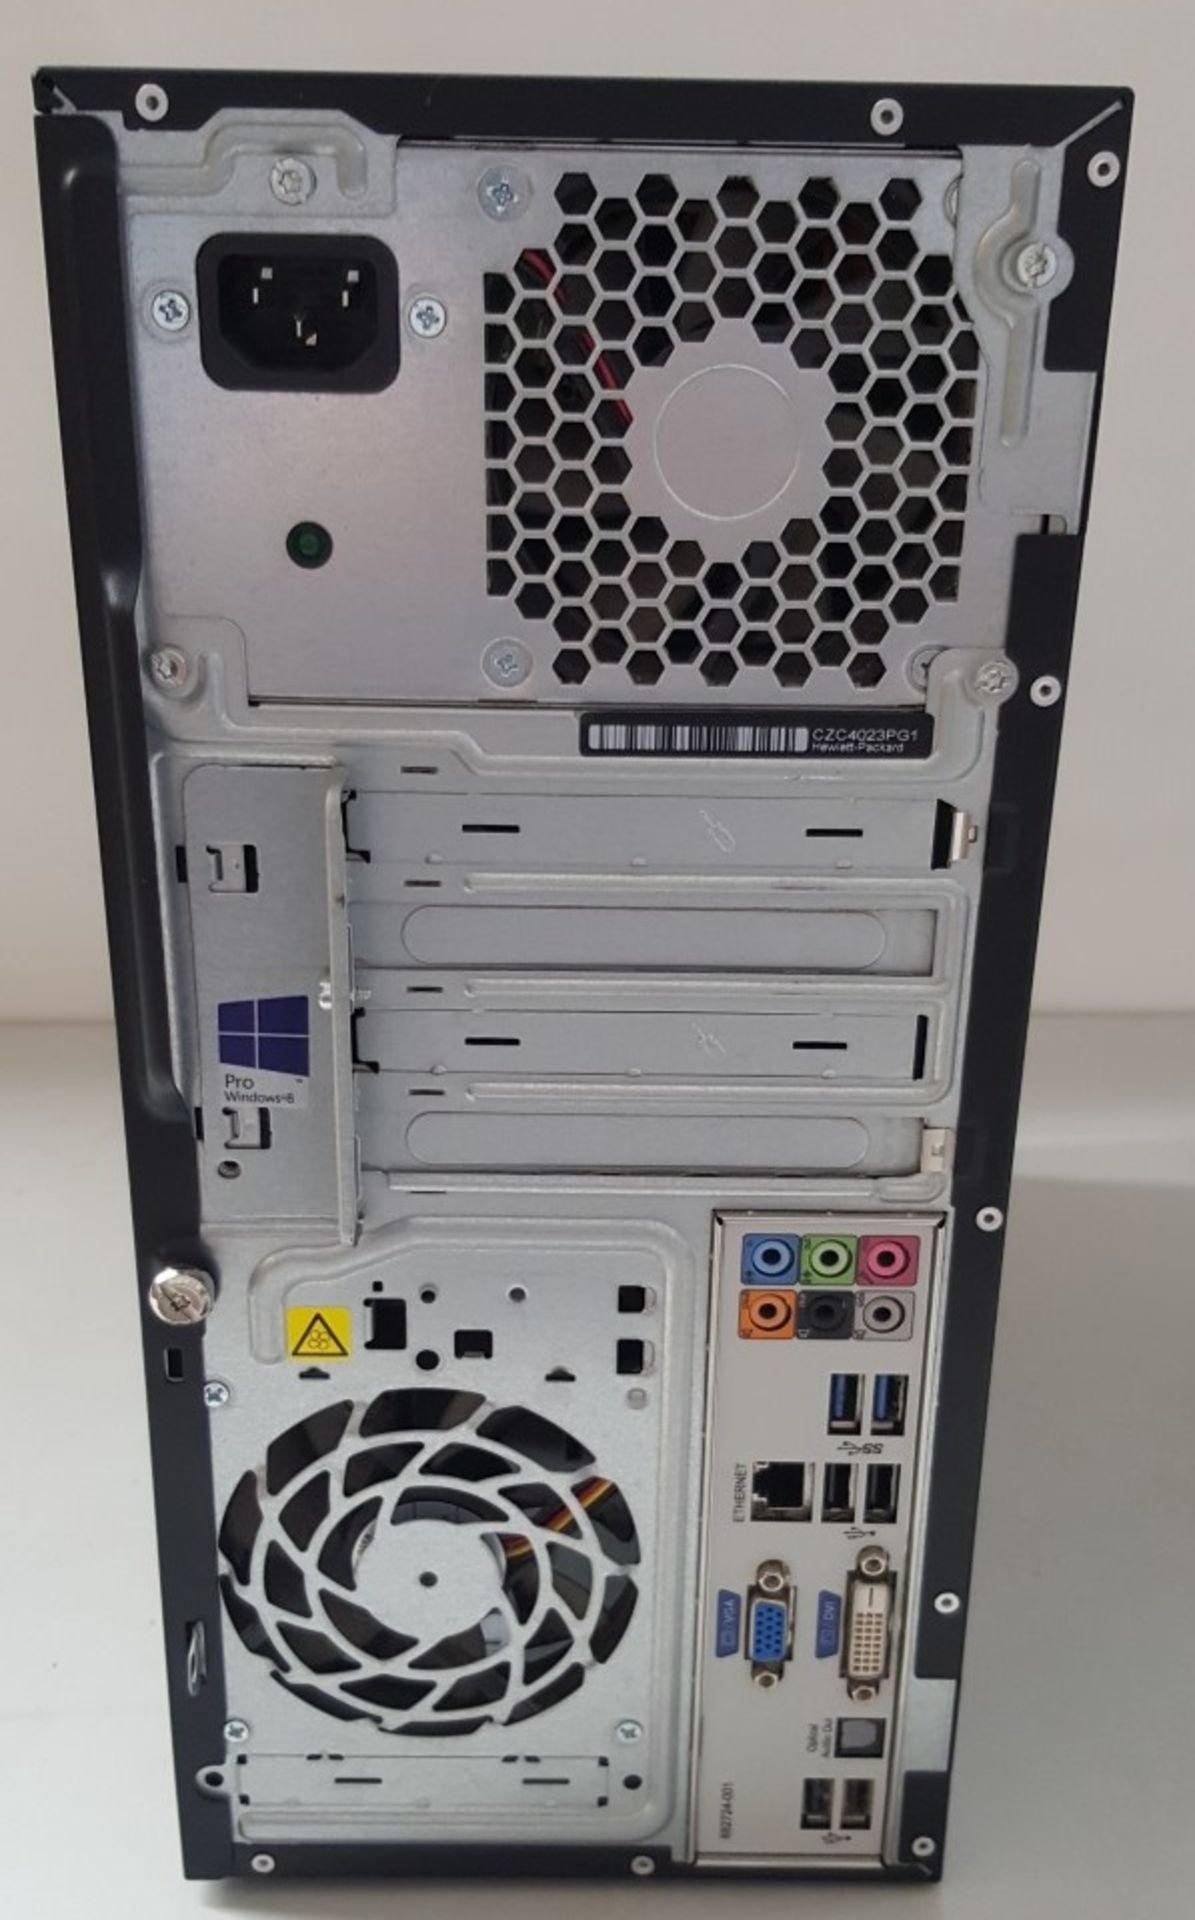 1 x HP Pro 3515 MT AMD A6-5400K 3.60GHz 4GB RAM Desktop PC - Ref BLT105 - Image 4 of 5